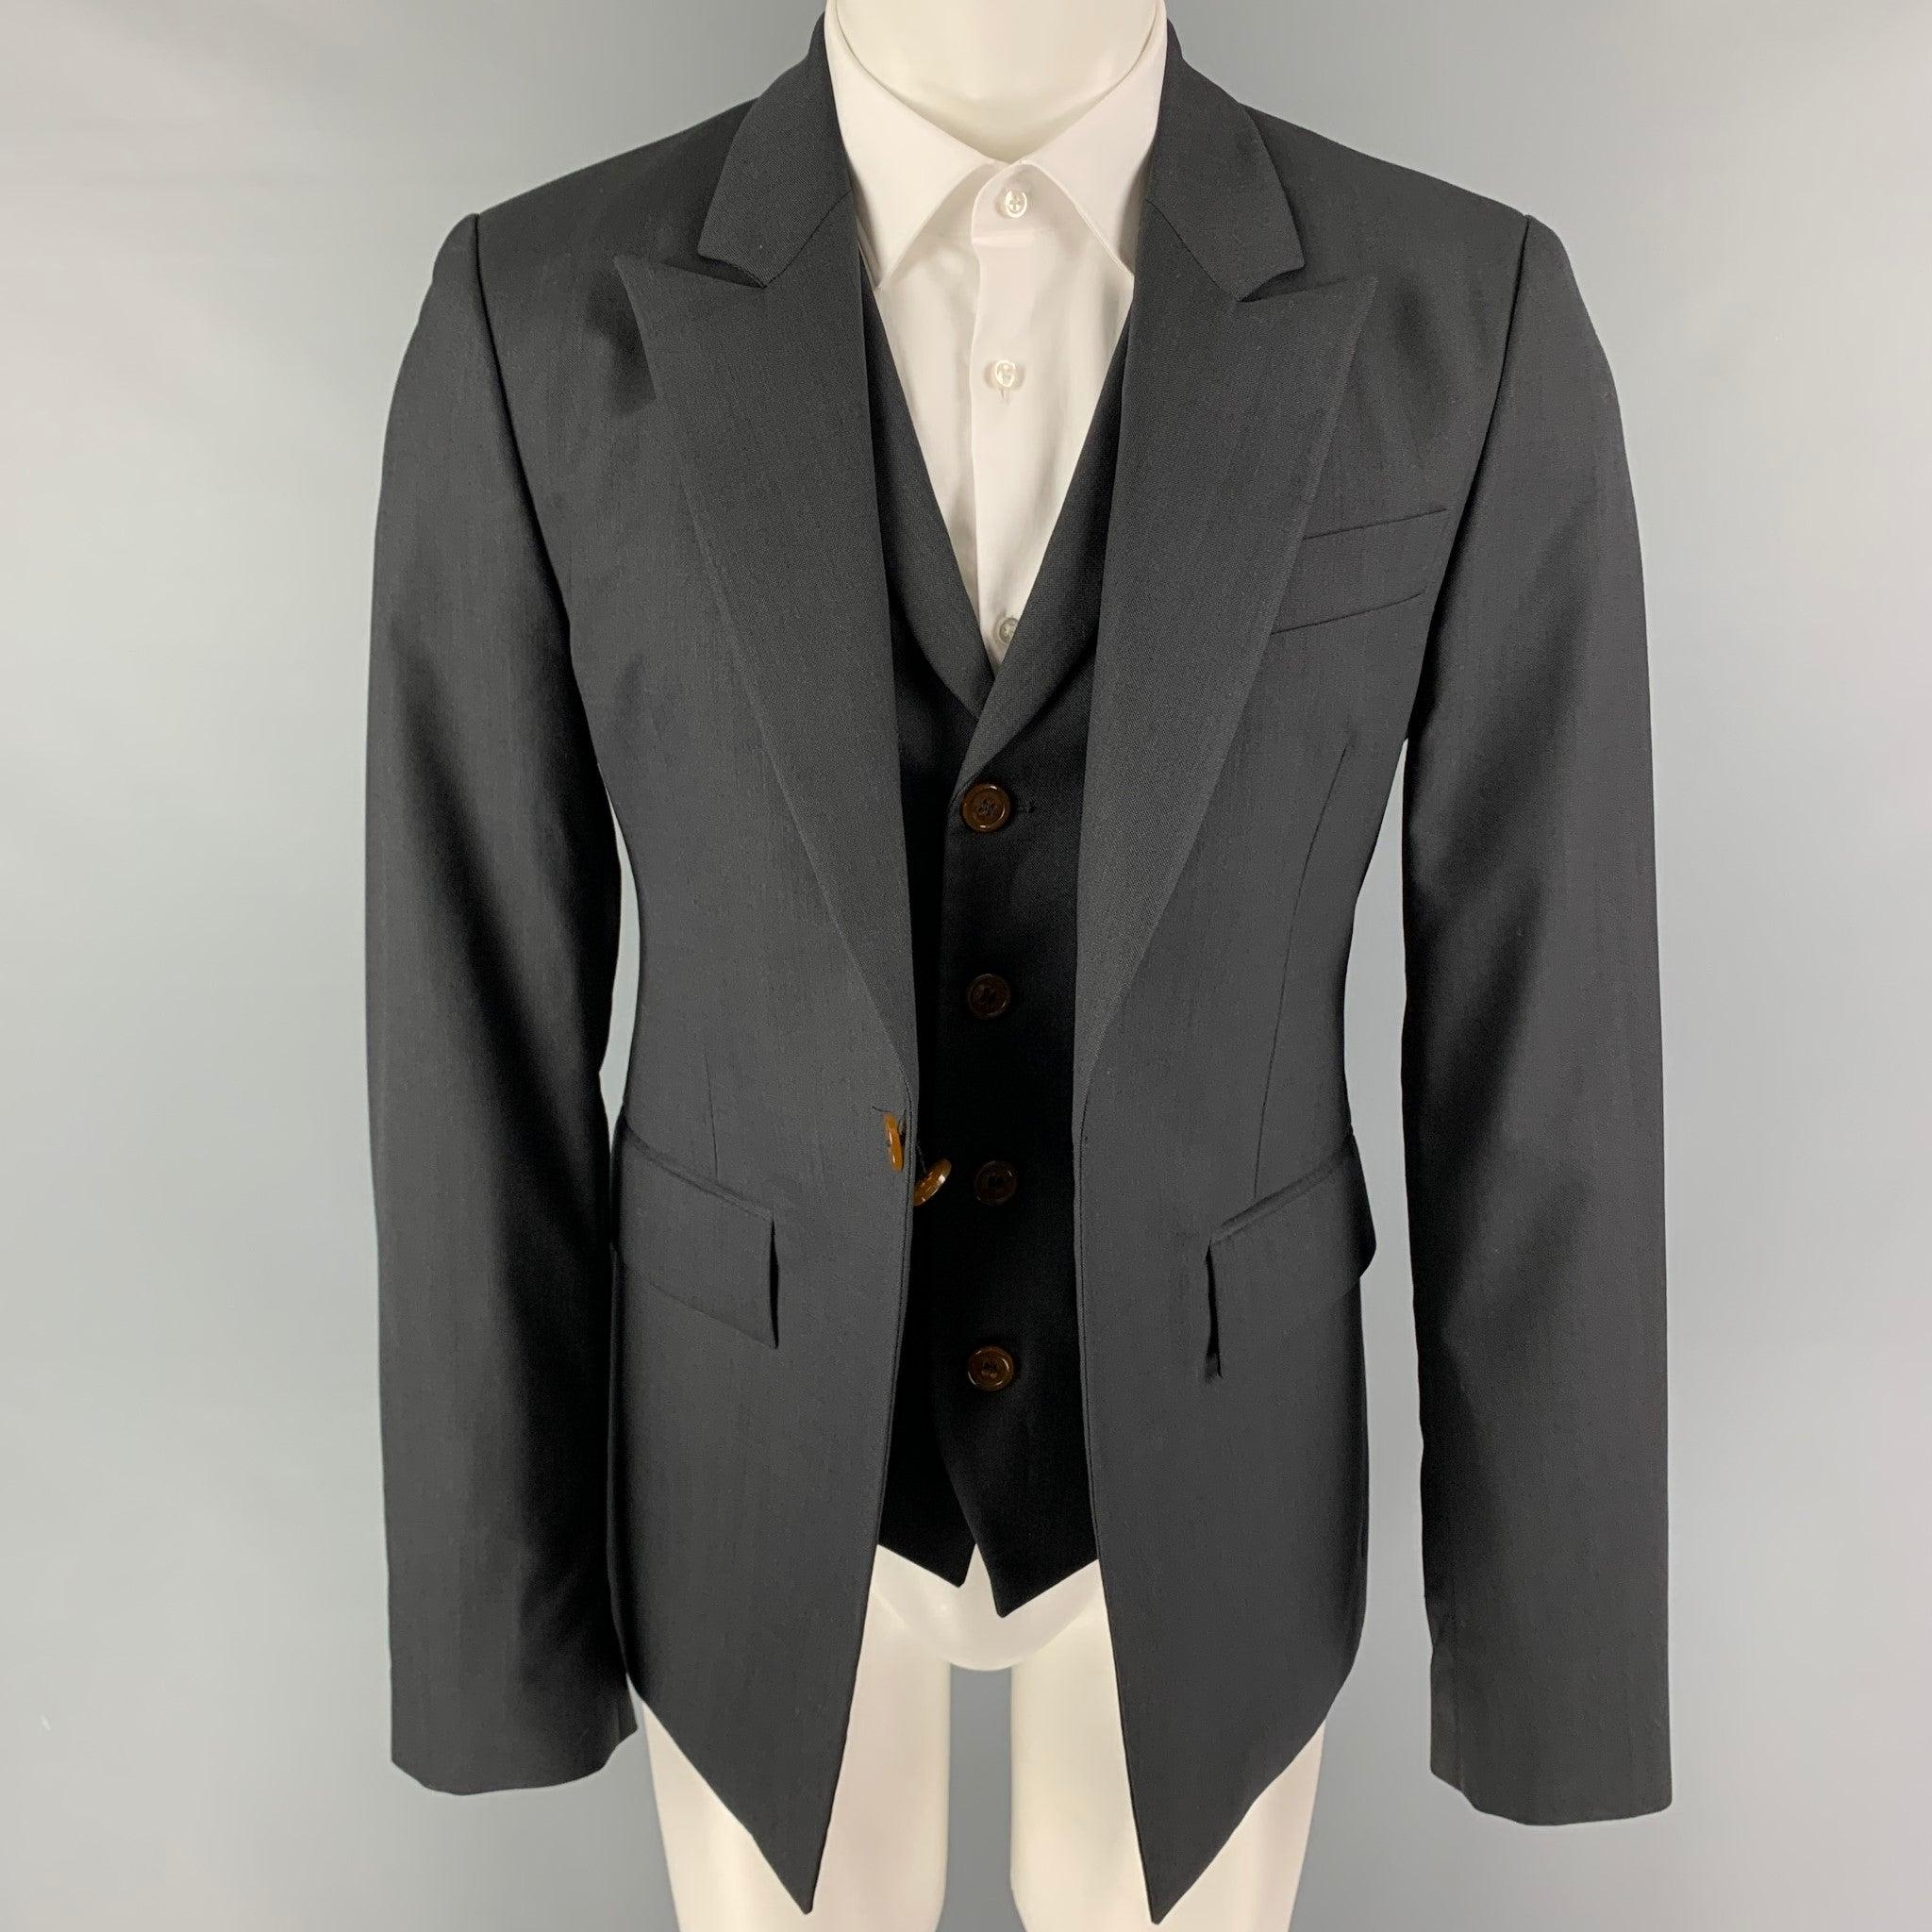 VIVIENNE WESTWOOD MAN sport coat comes in a charcoal wool with a full liner featuring a peak lapel, simulated vest layer, flap pockets, single back vent, and a single button closure. Made in Italy.
Excellent
Pre-Owned Condition. 

Marked:   50